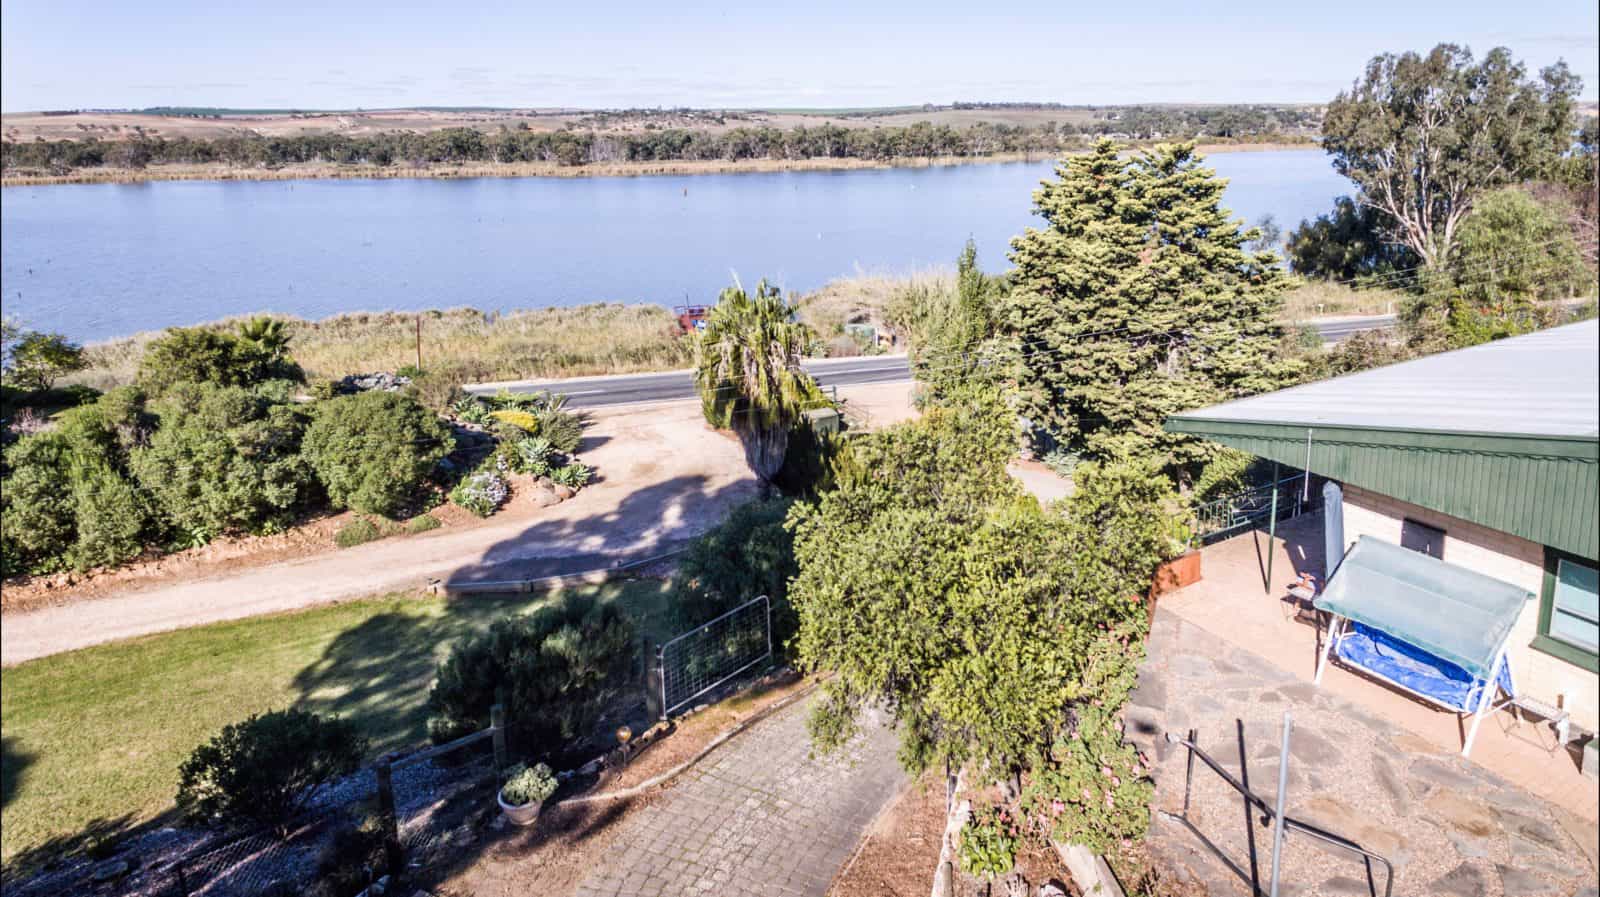 Overlooking the Back waters of mannum